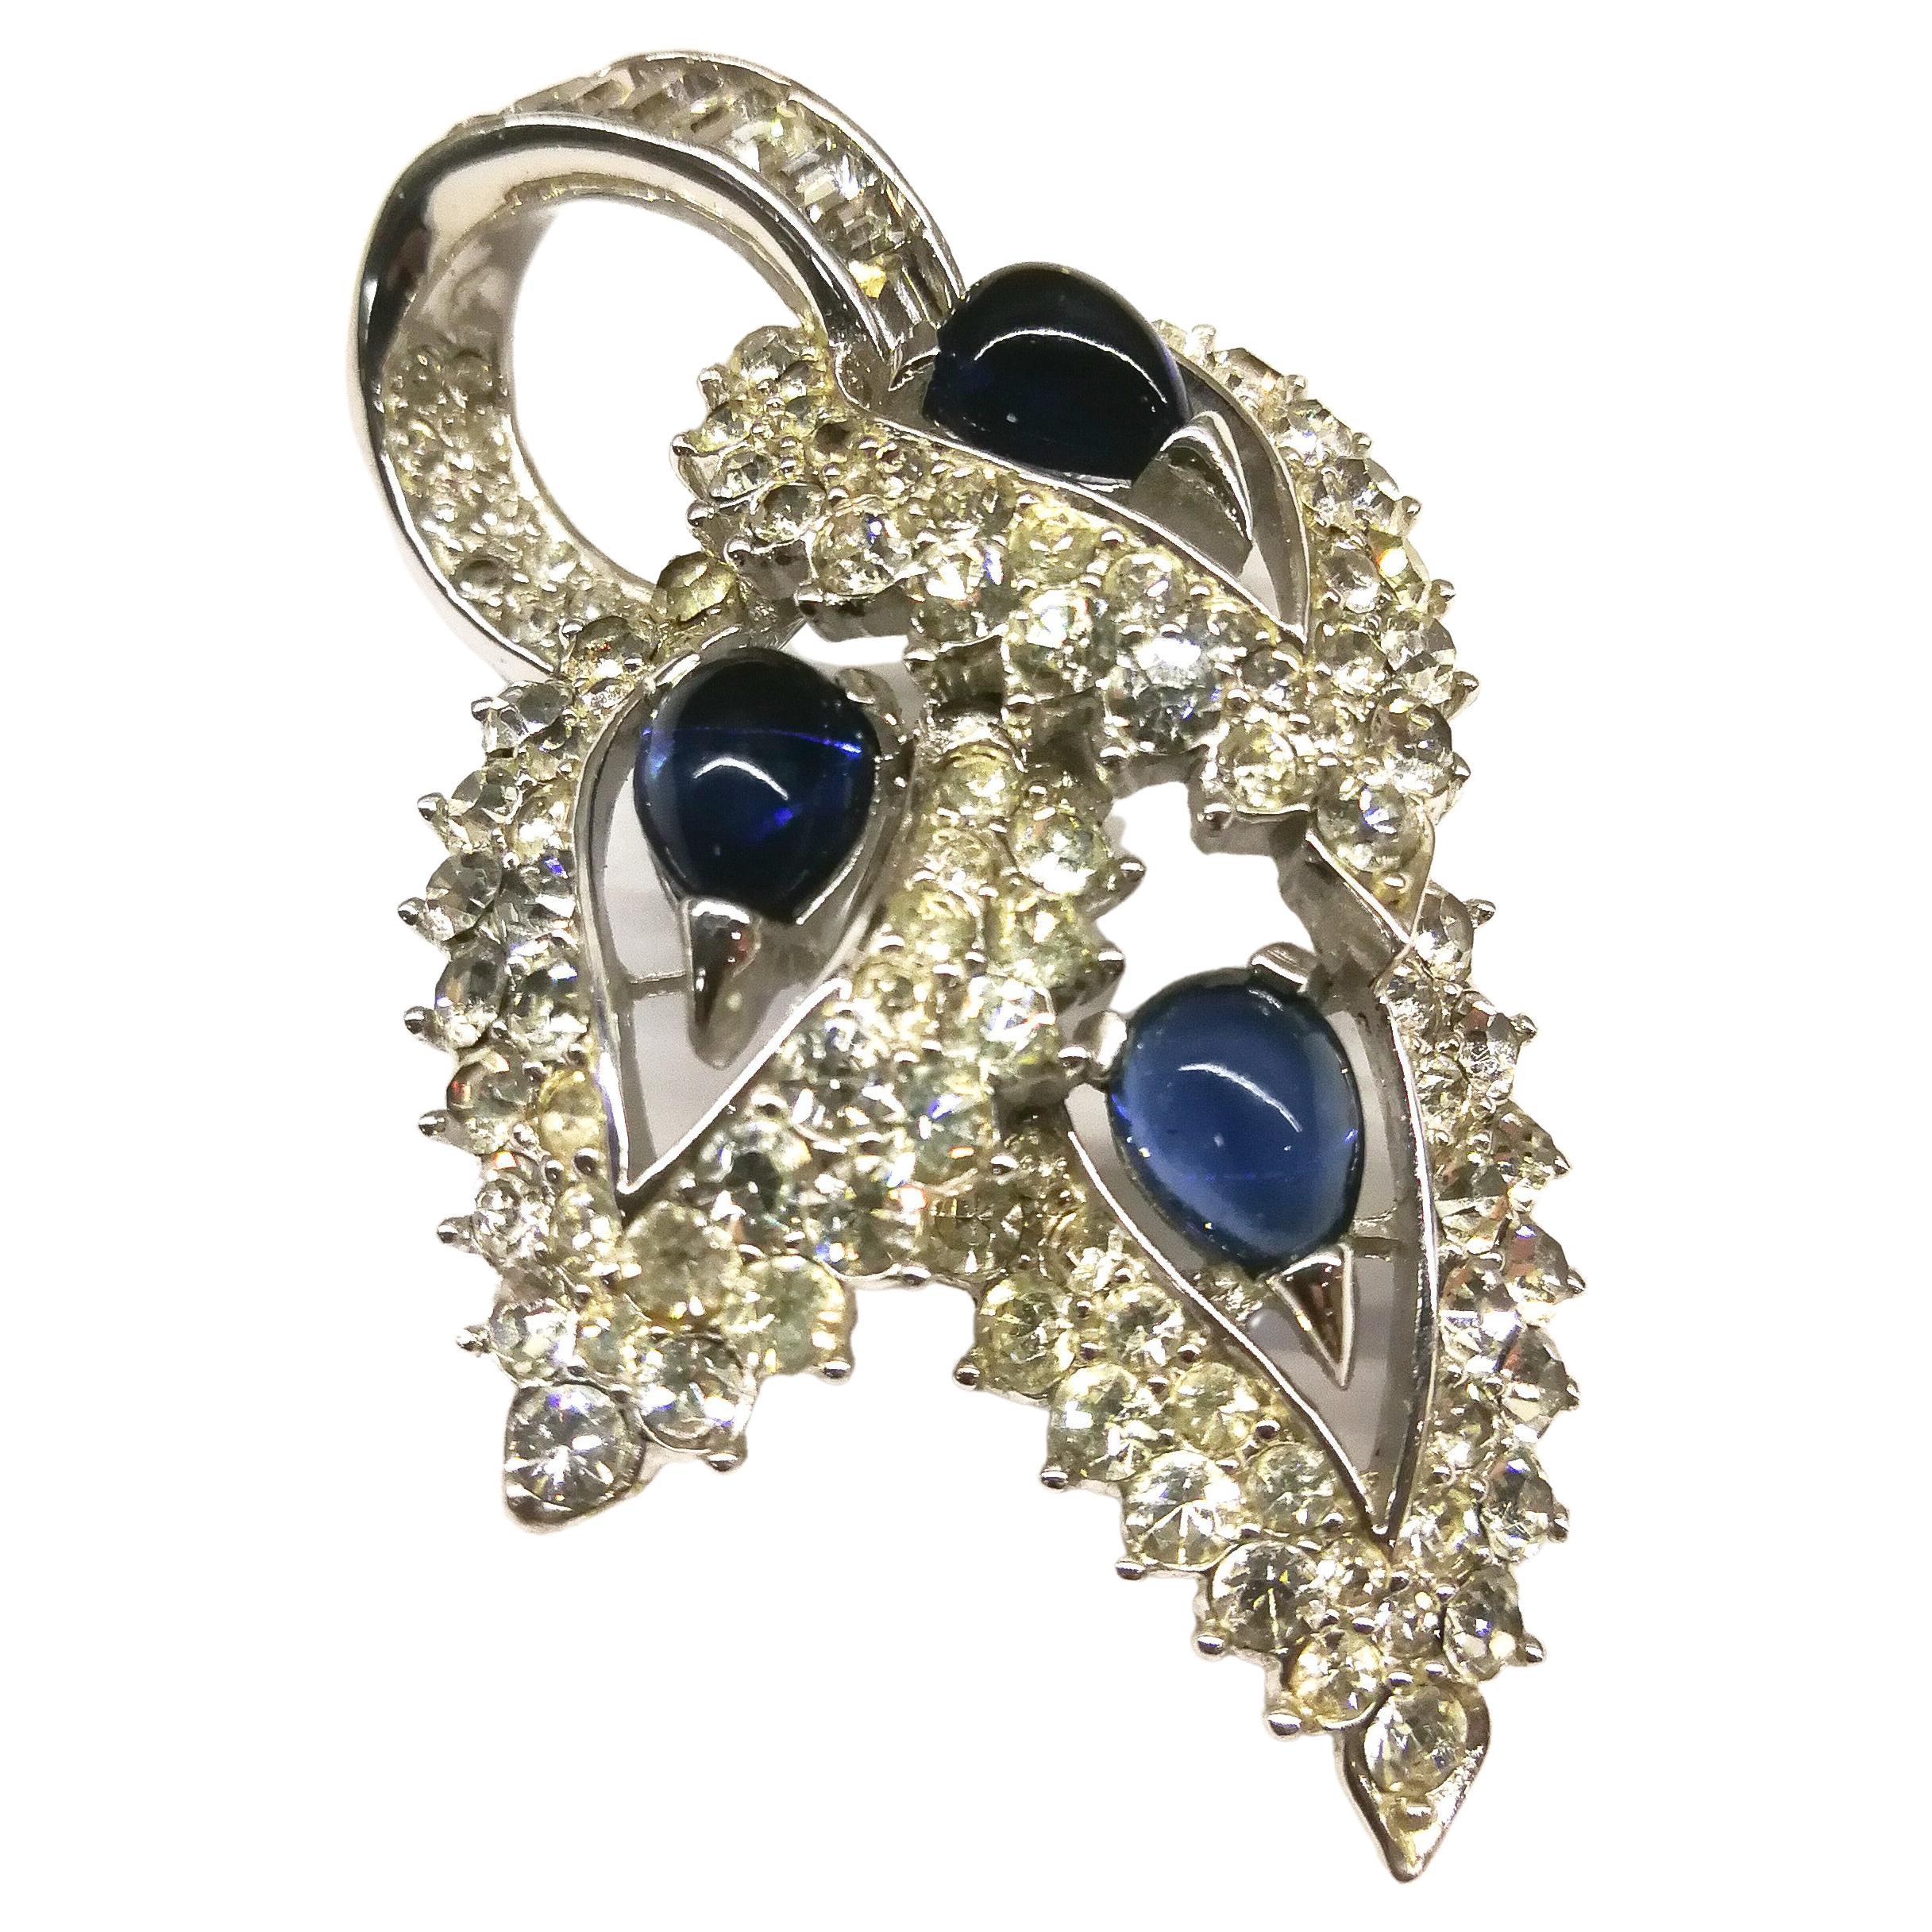 A delightful paste brooch, with a design of three stylised leaves, one on top of the other, encrusted in clear pastes and each leaf set with a sapphire blue glass cabuchon. Highly typical of the exquisite work of Marcel Boucher in the 1960s, it is a